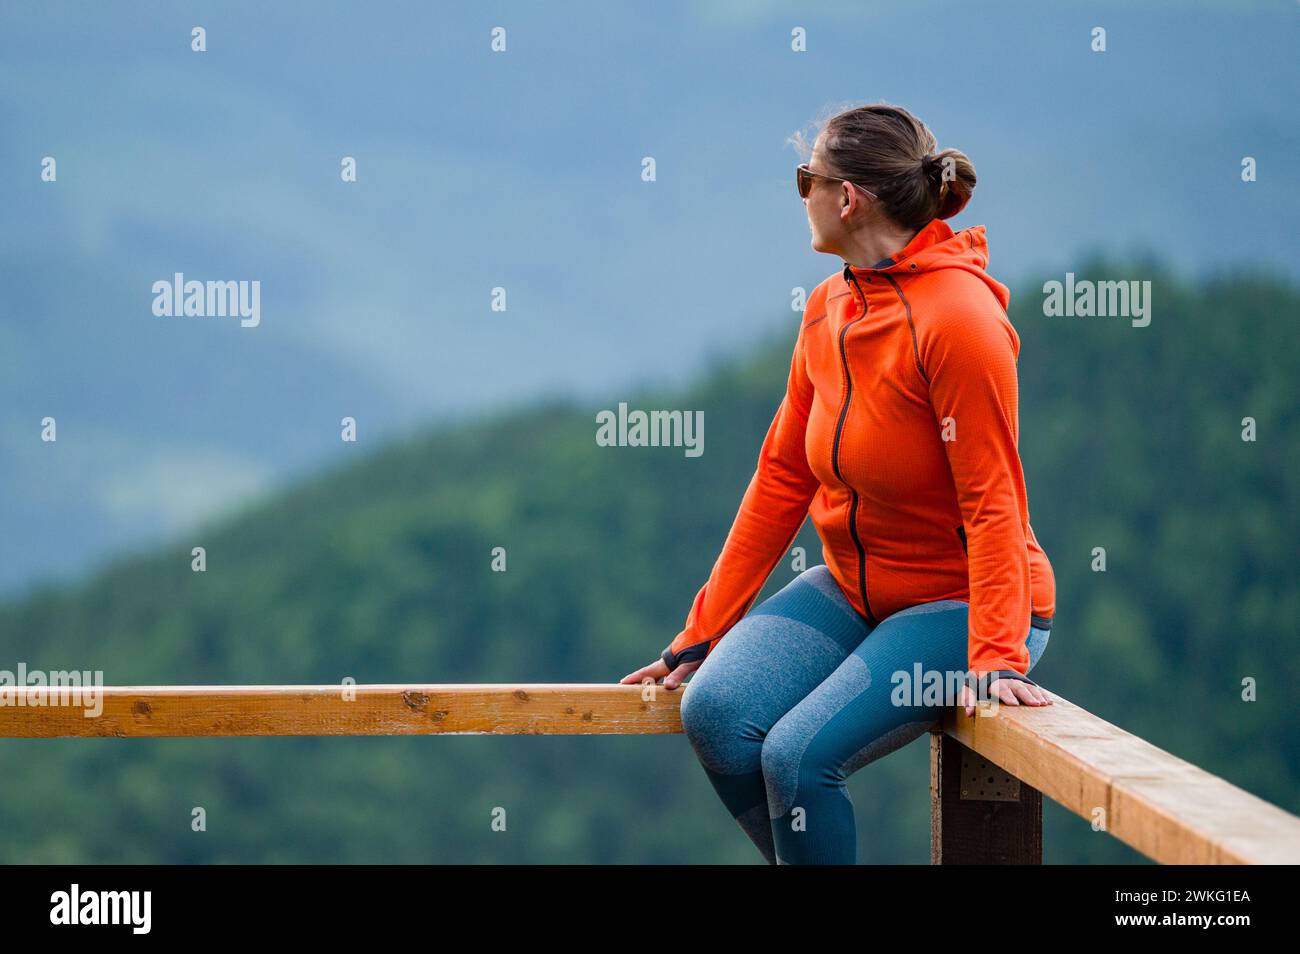 a young girl sits on a wooden handrail, against the background of mountains and evergreen forest. Stock Photo